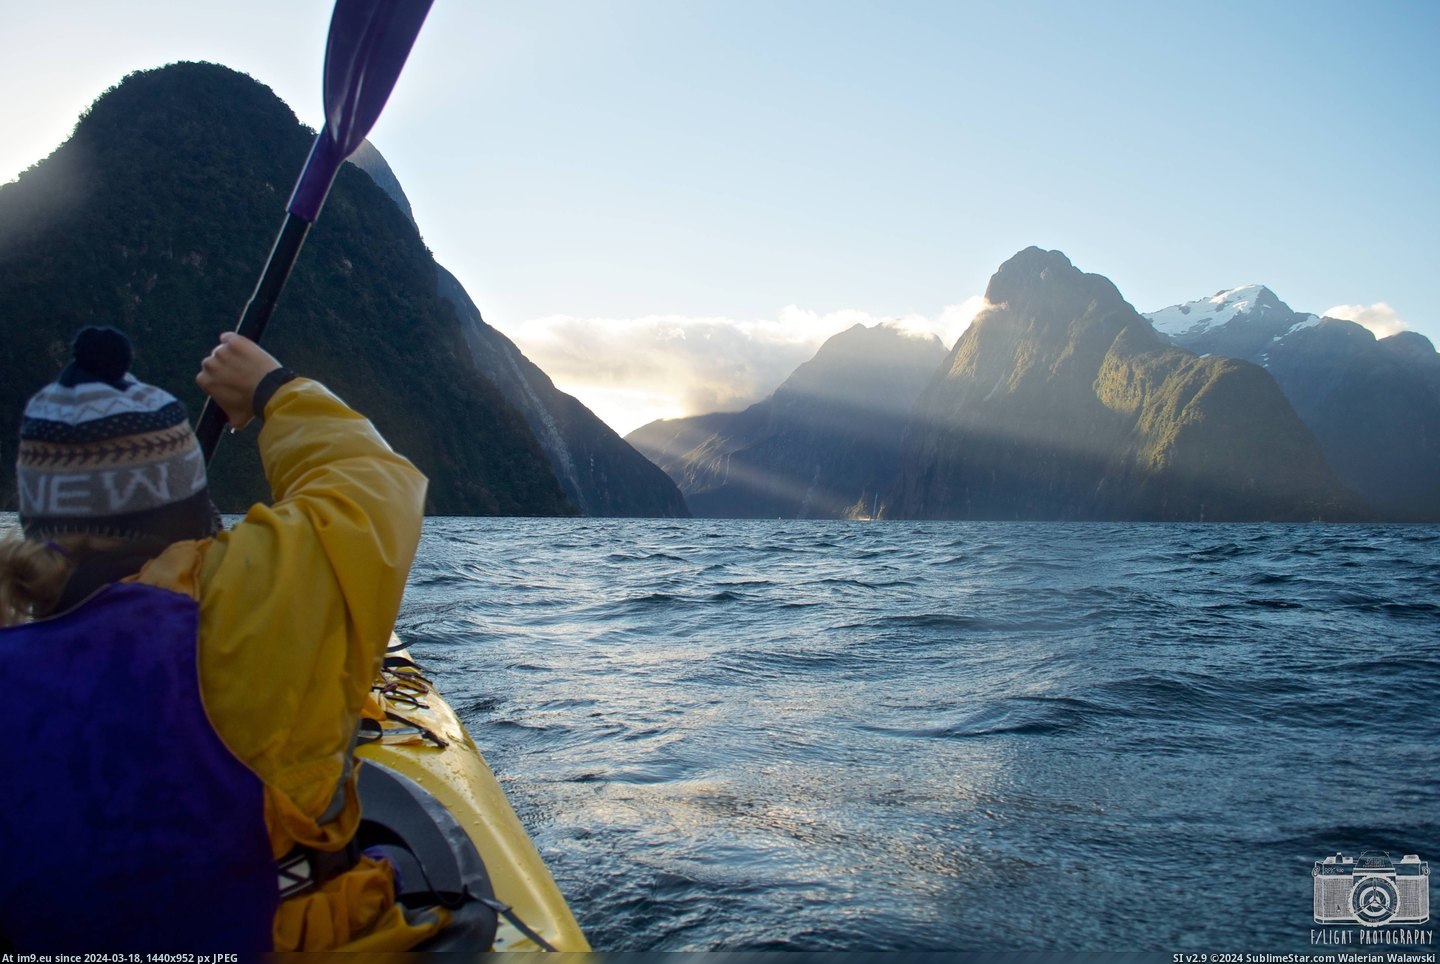 #Park #National #Zealand #Milford #Kayaking #Sound #4288x2848 #Fiordland [Earthporn] Kayaking the Milford Sound, Fiordland National Park, New Zealand [4288x2848] [OC] Pic. (Image of album My r/EARTHPORN favs))